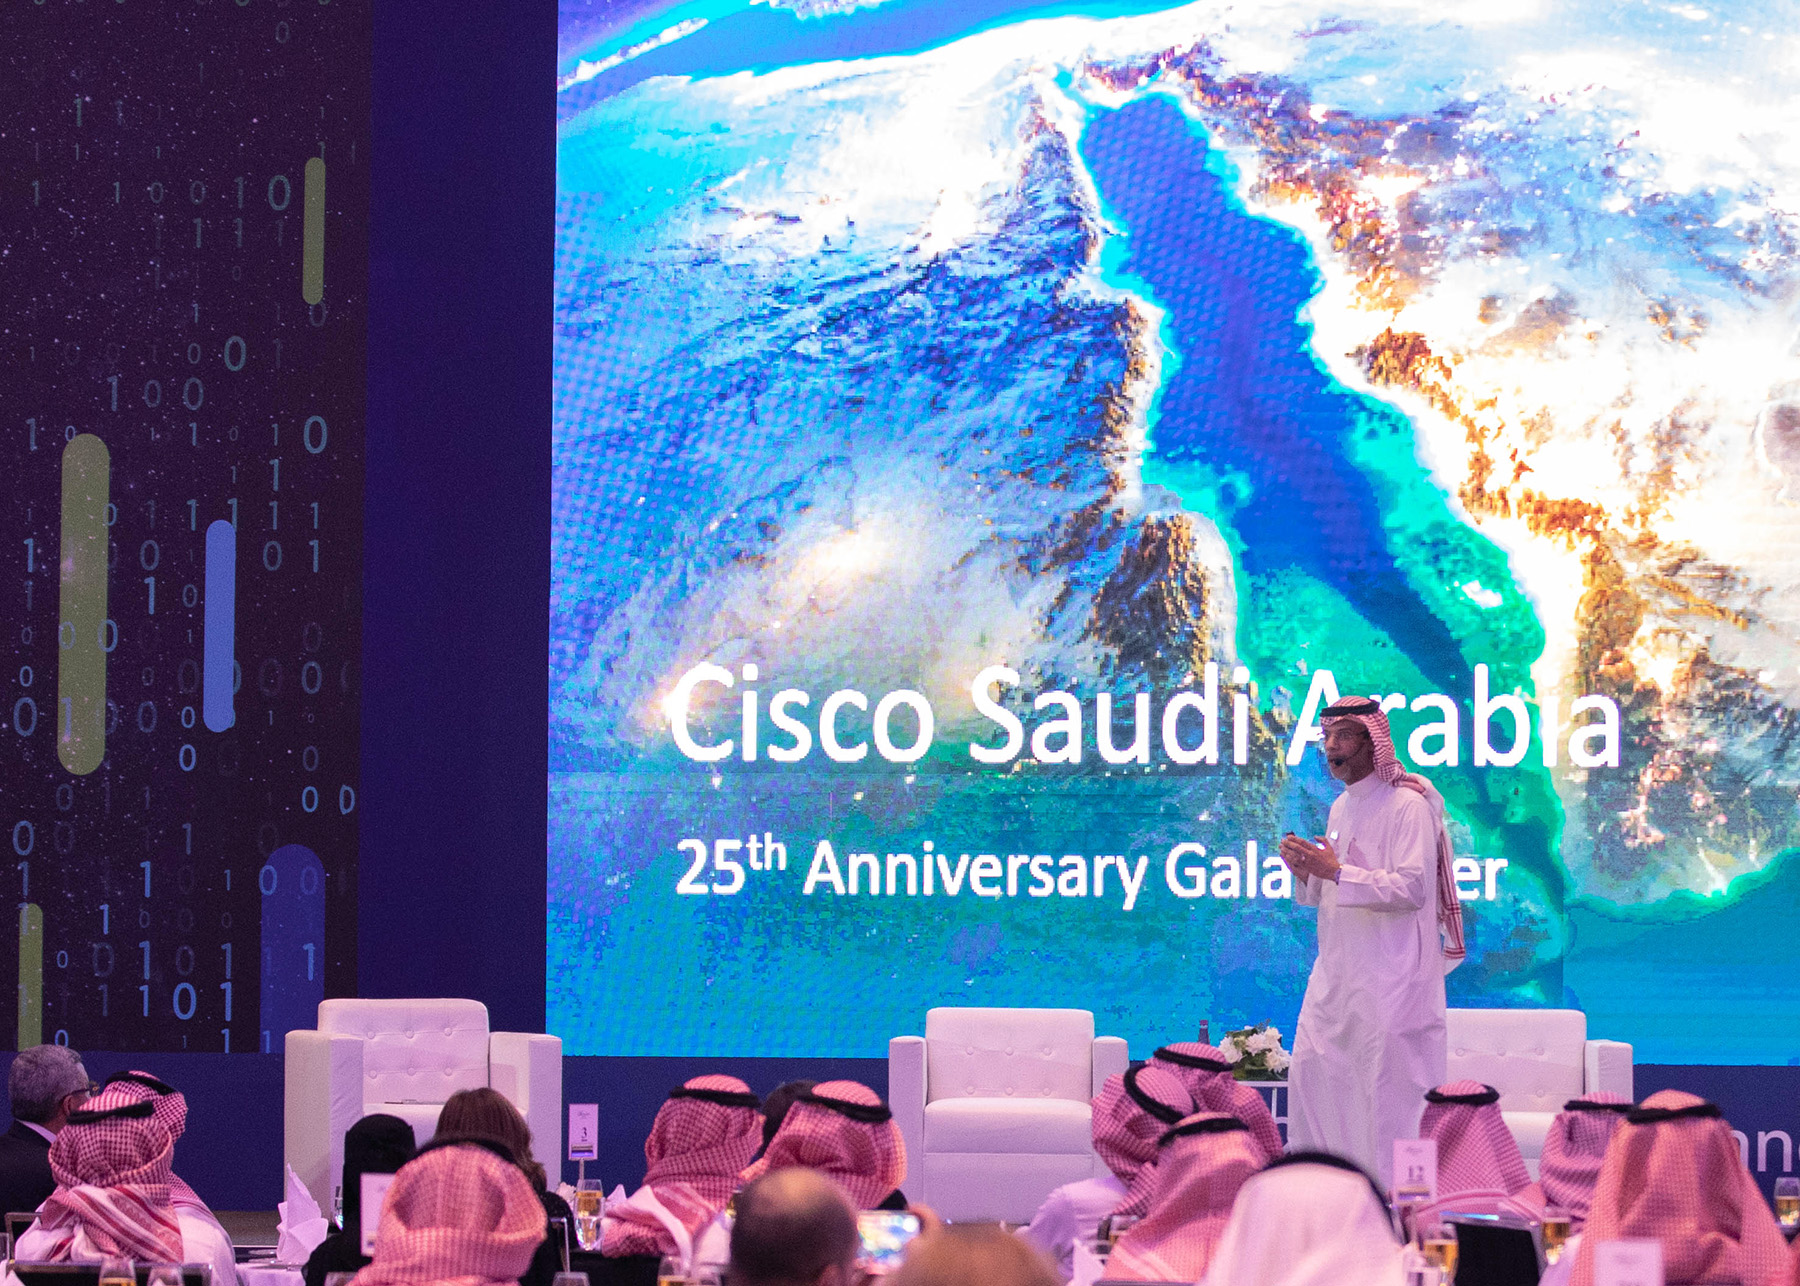 Photo from the Cisco event with a speaker engaging the audience